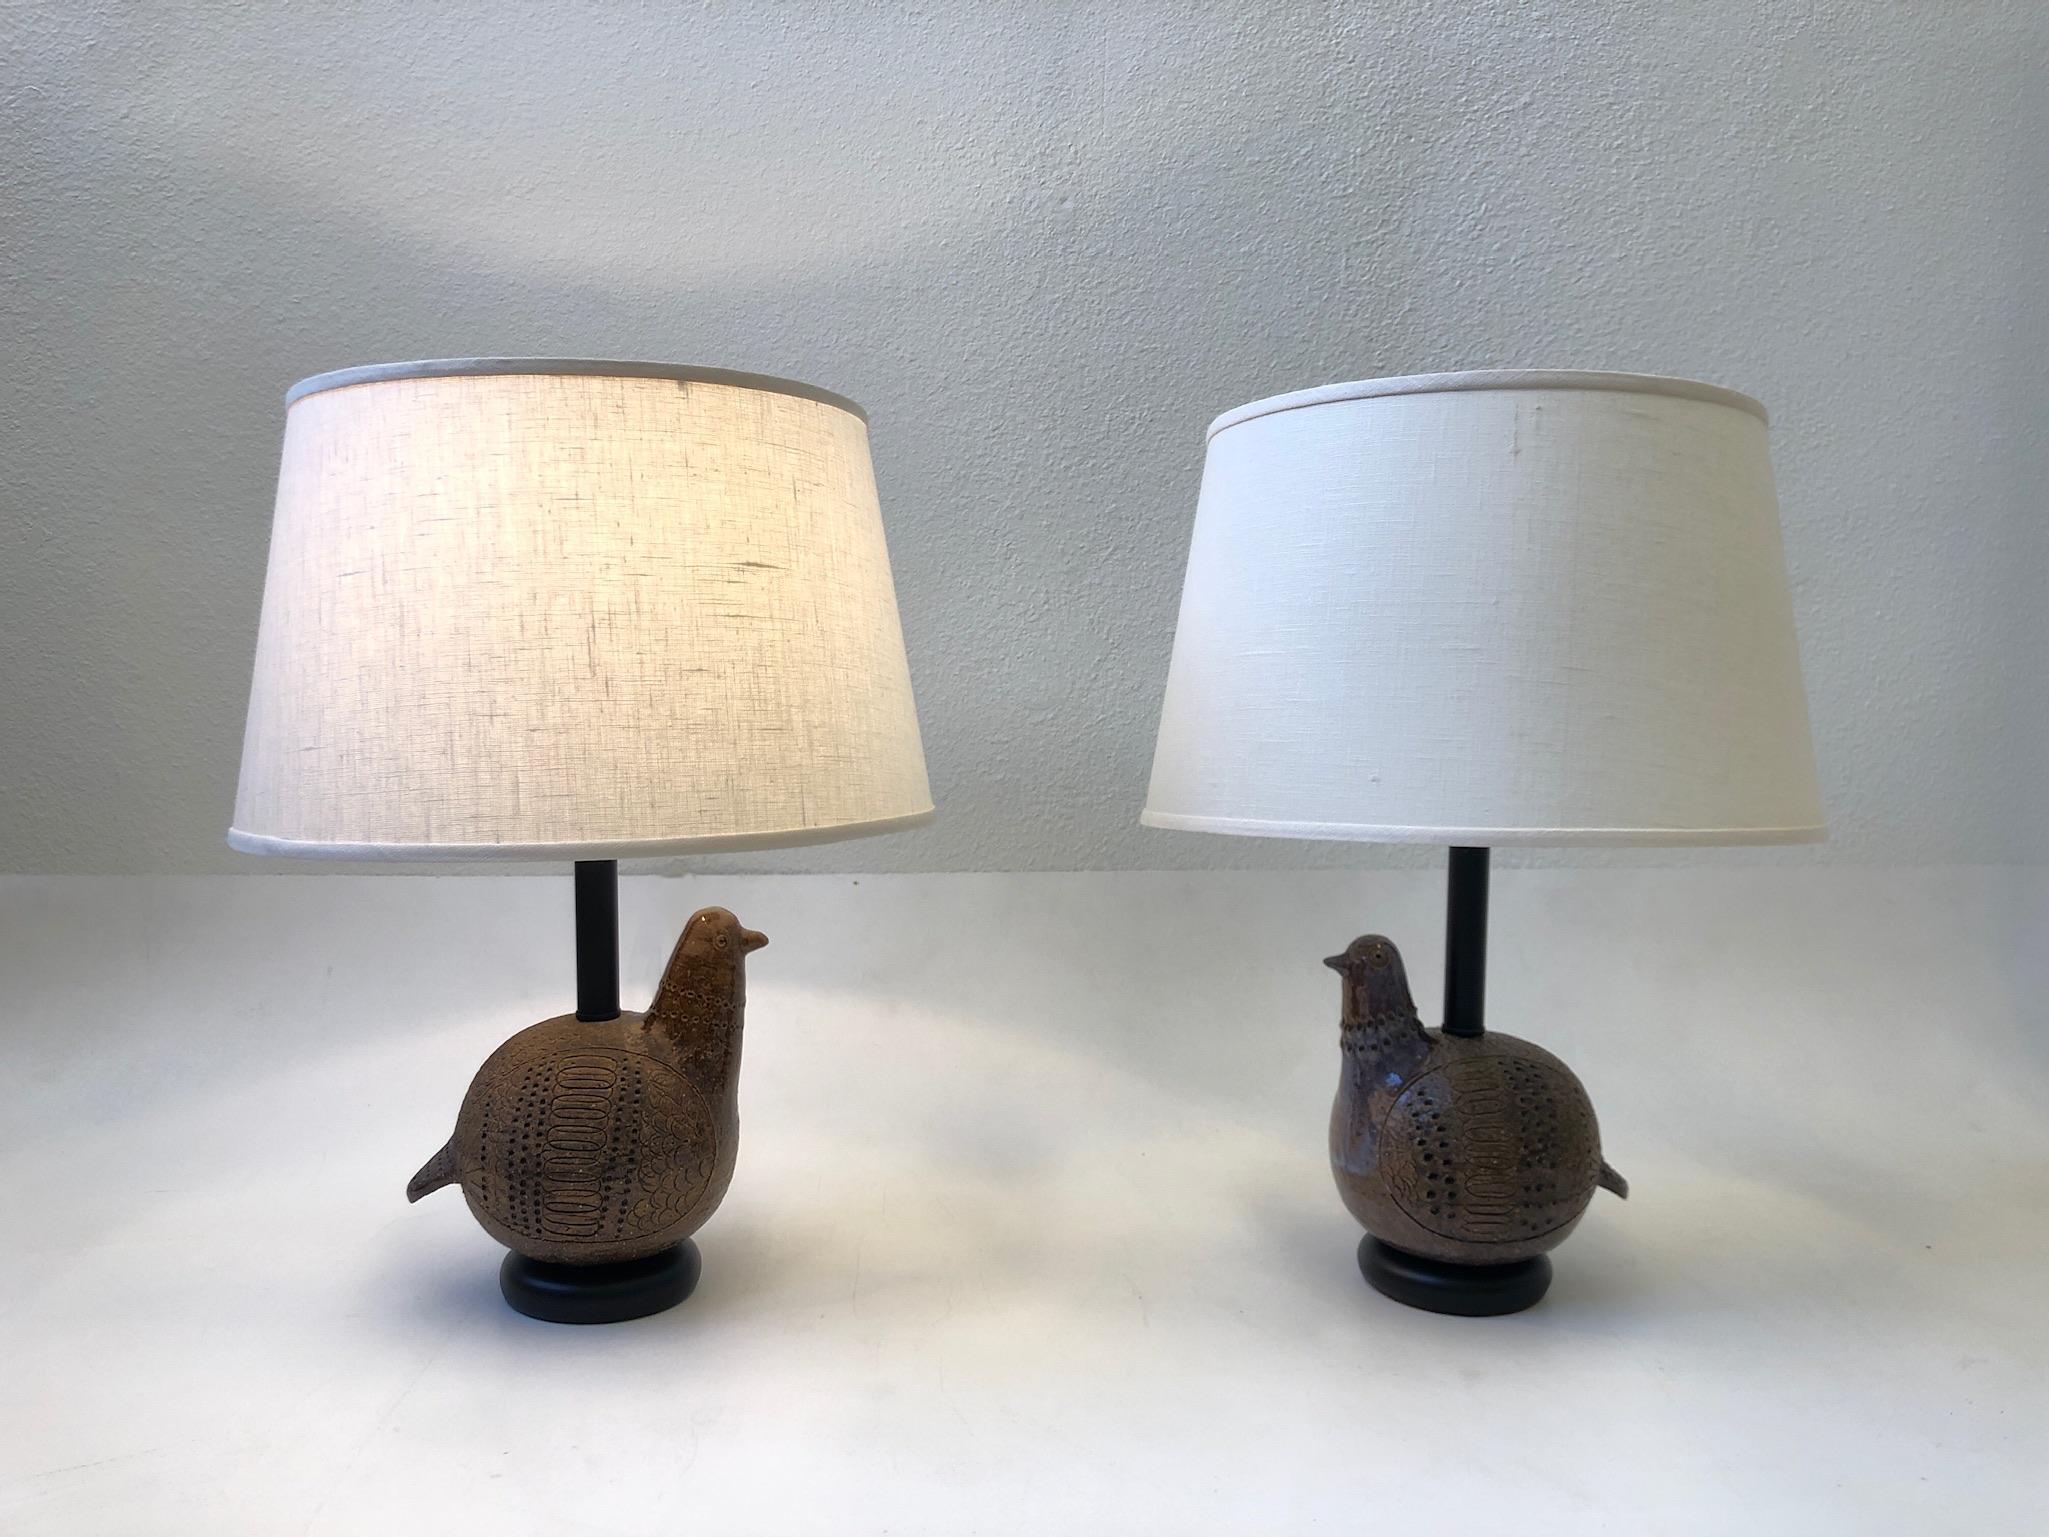 Pair of Italian brown ceramic birds and black lacquered table lamps design in the 1970s by Aldo Londi for Bitossi. Newly rewired with brass hardware and new vanilla linen shades. The bird are handmade, so they are not exactly the